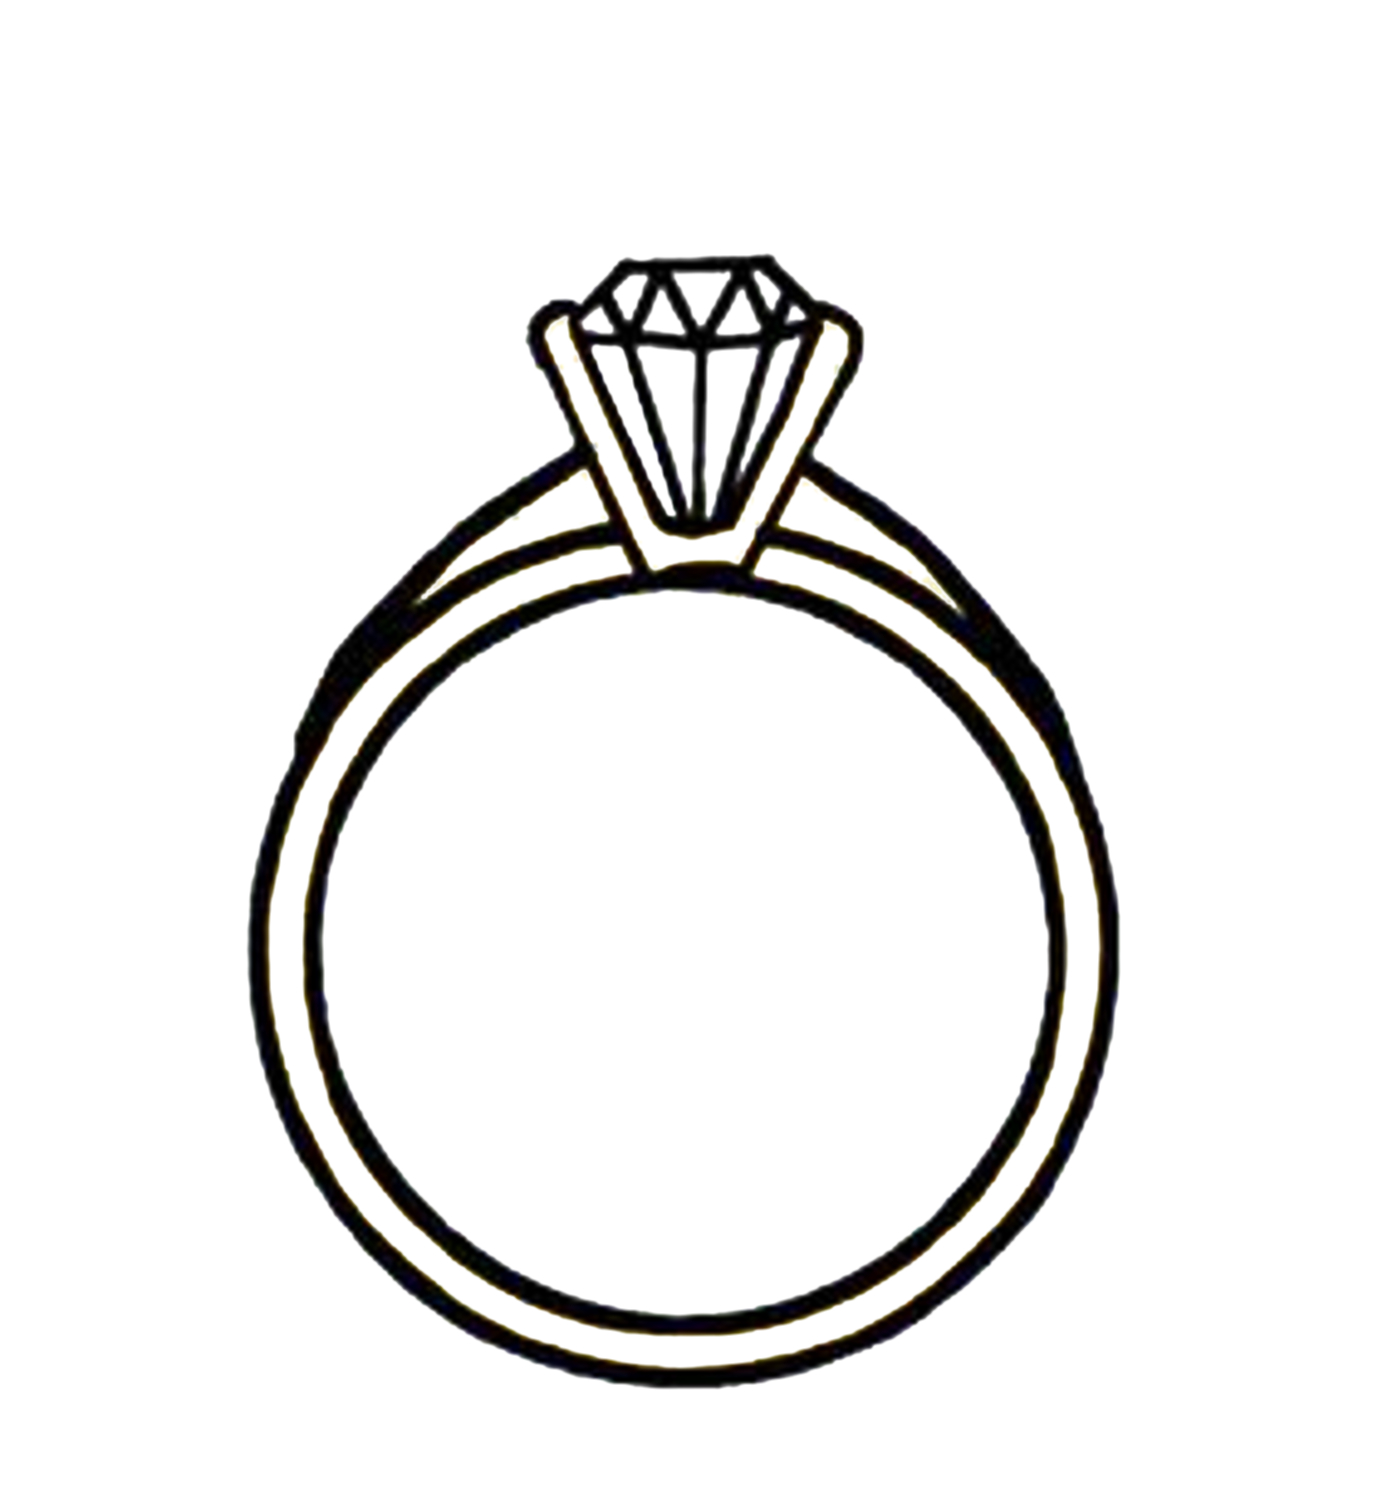 Linked Wedding Rings Images Hd Photo Clipart